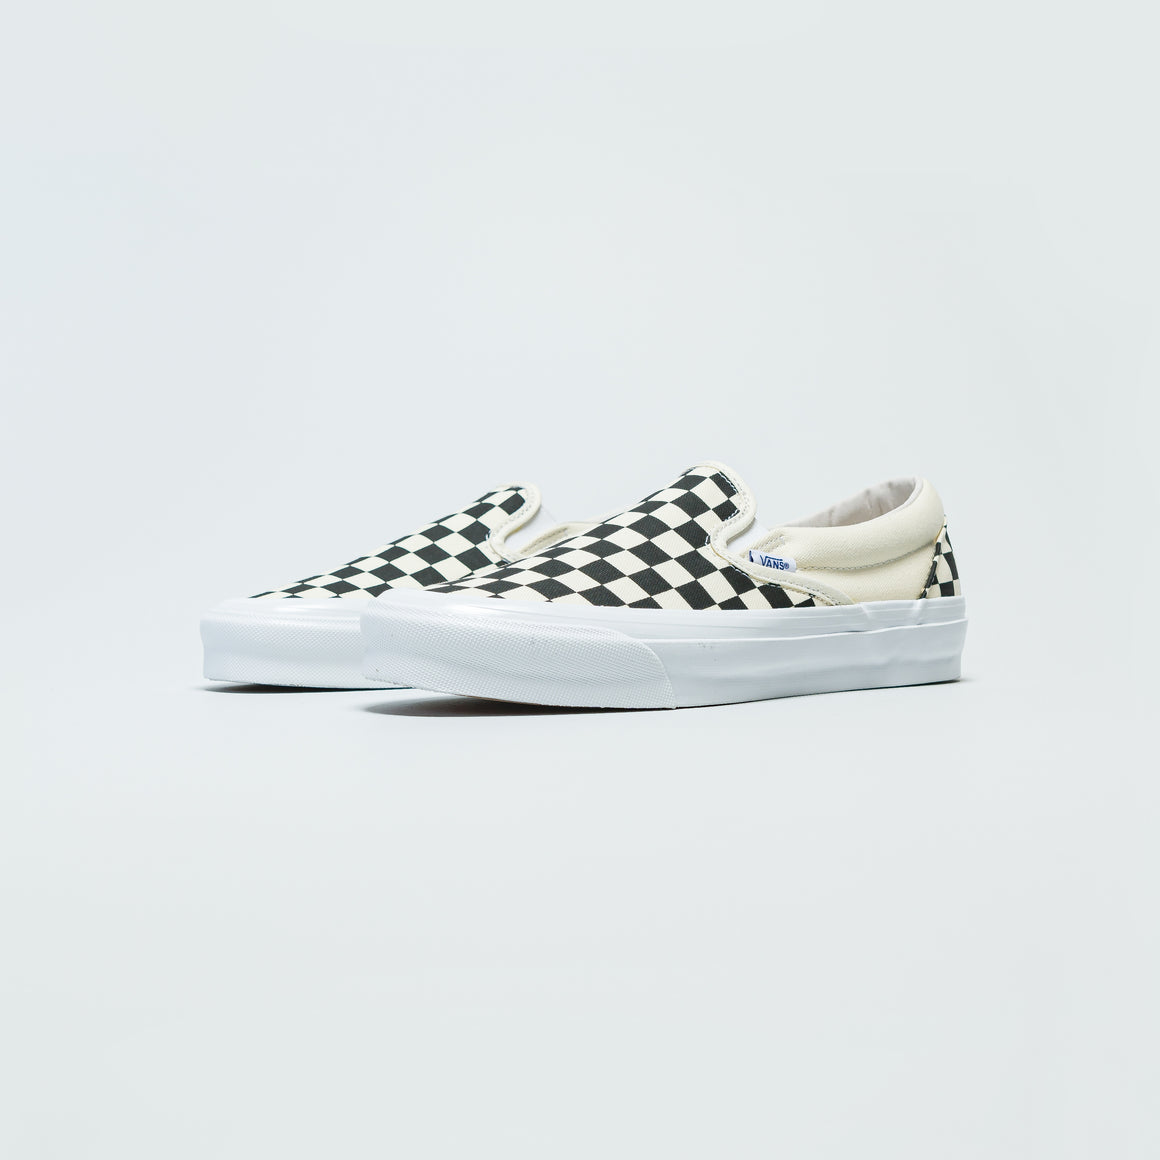 Vans - OG Classic Slip-On LX - Checkerboard - UP THERE